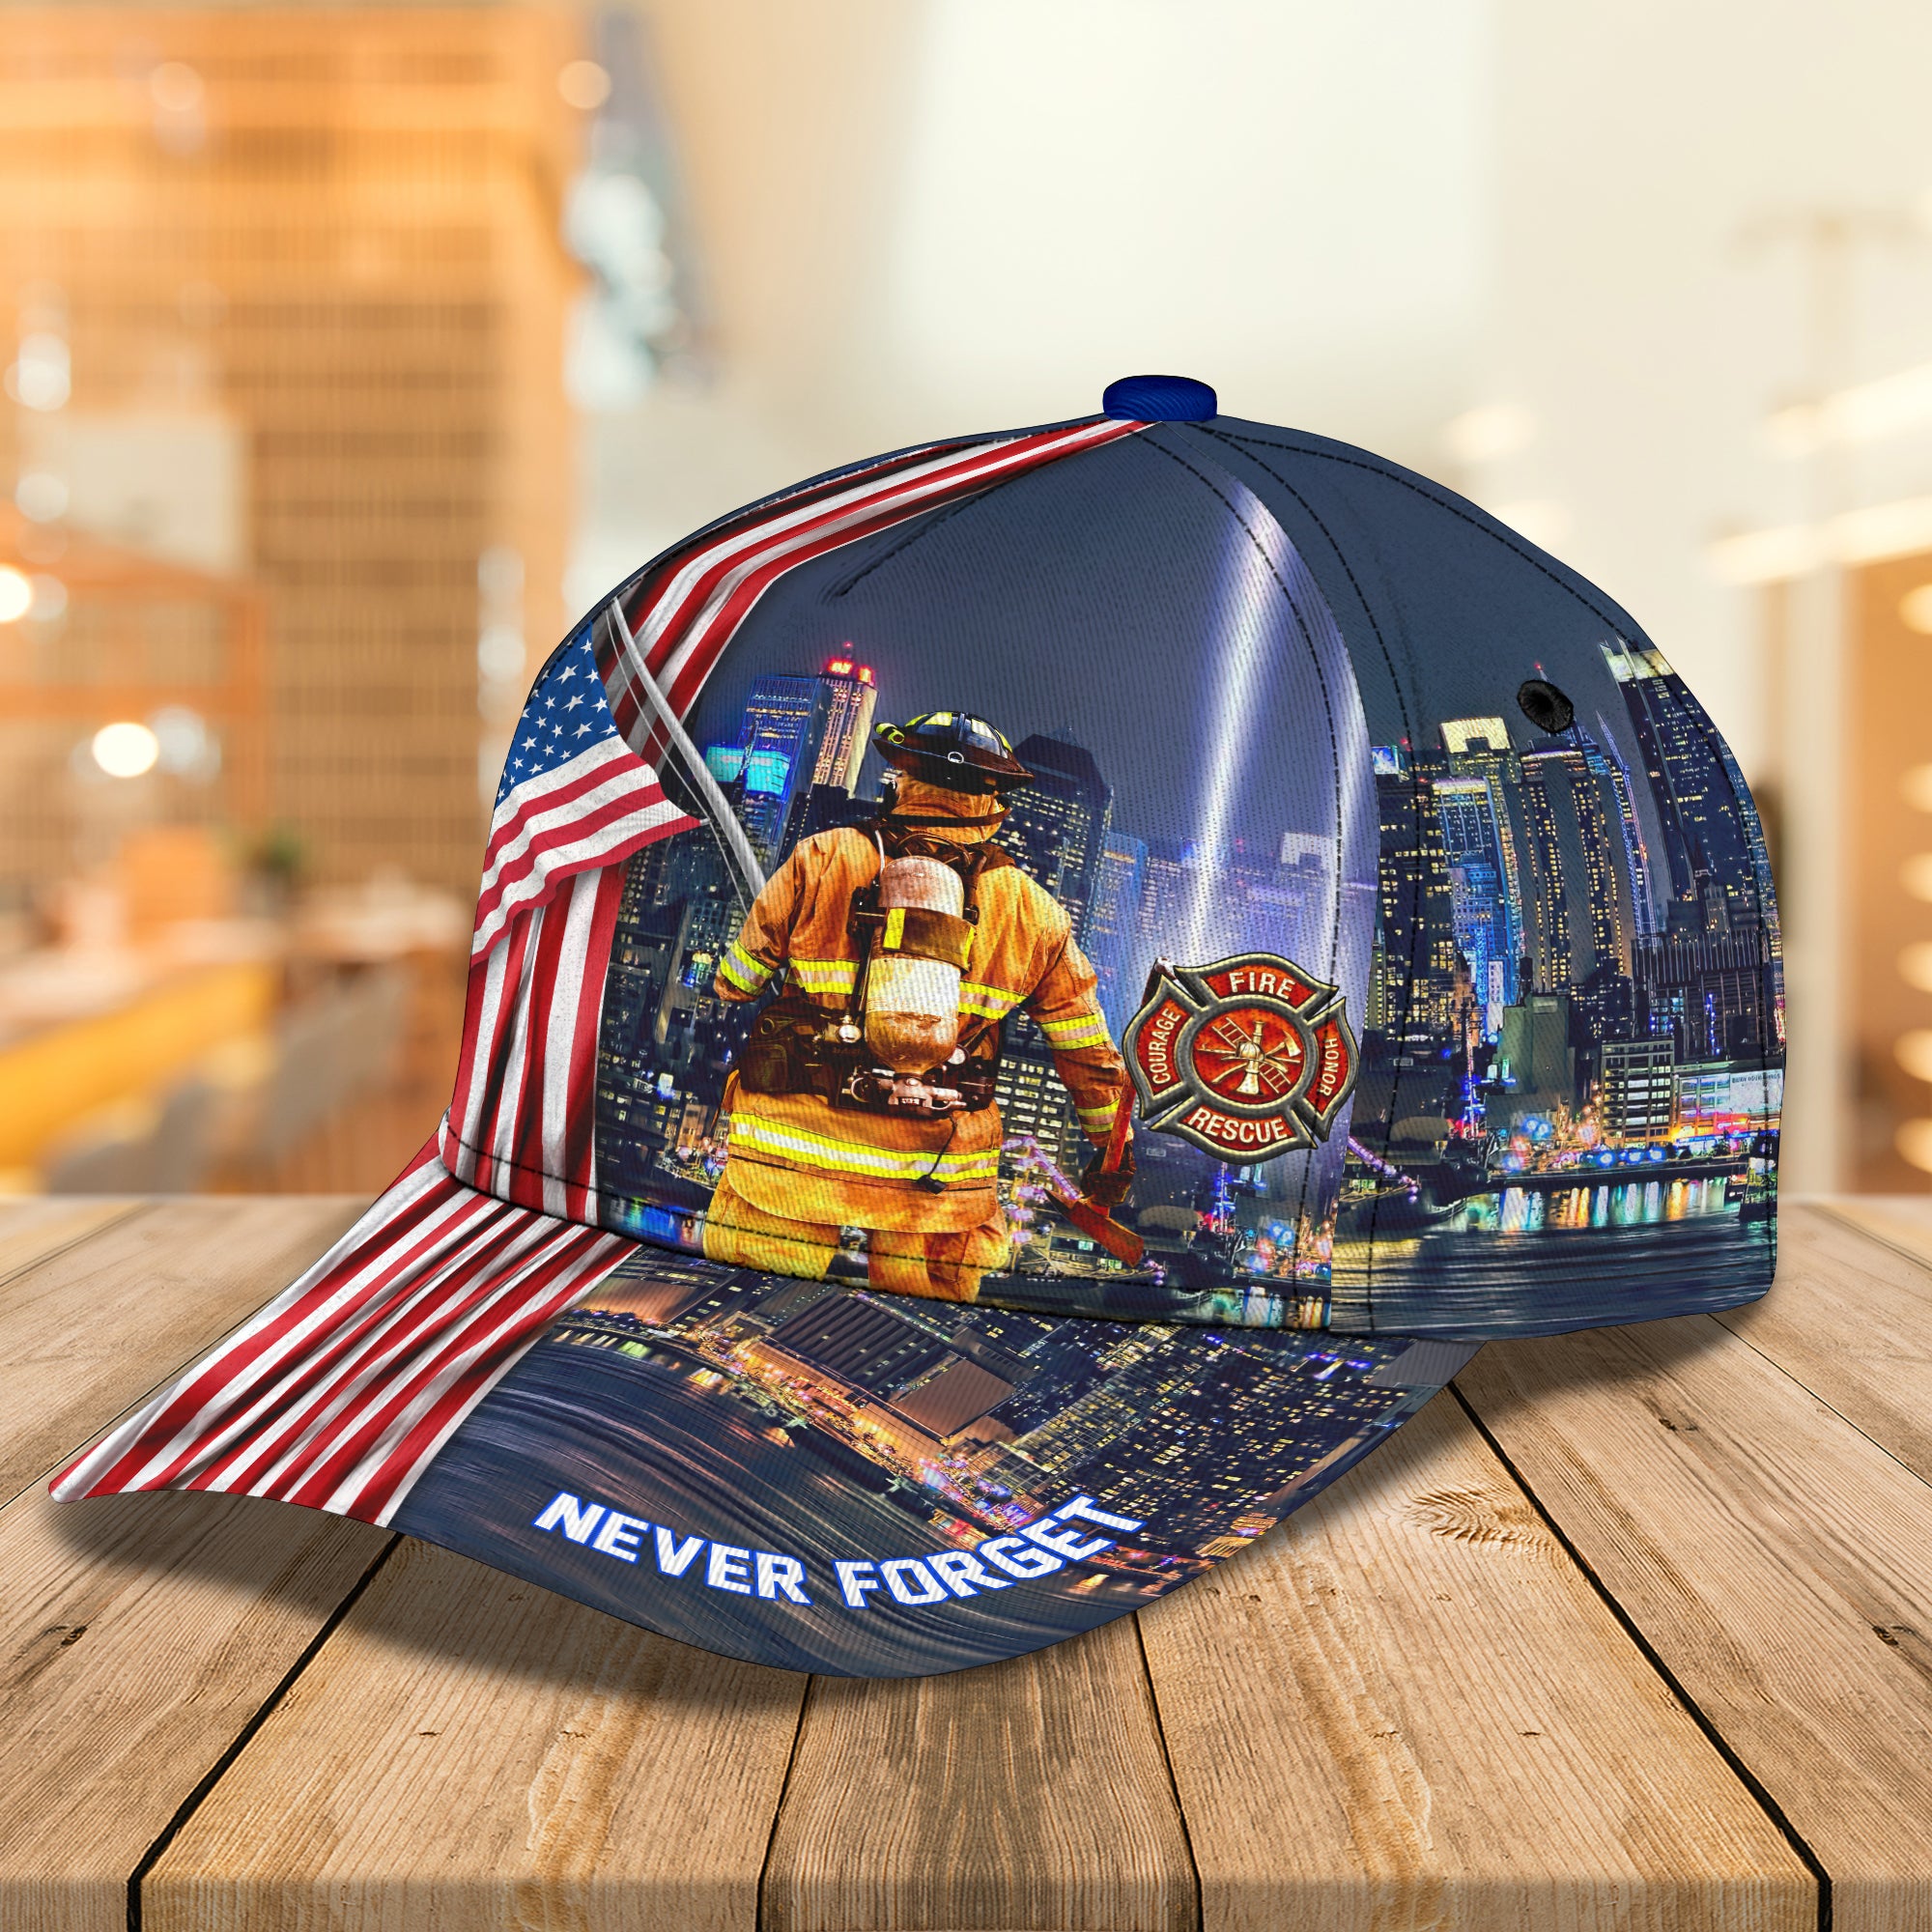 Firefighter never forget - Personalized Name Cap - Ntt68